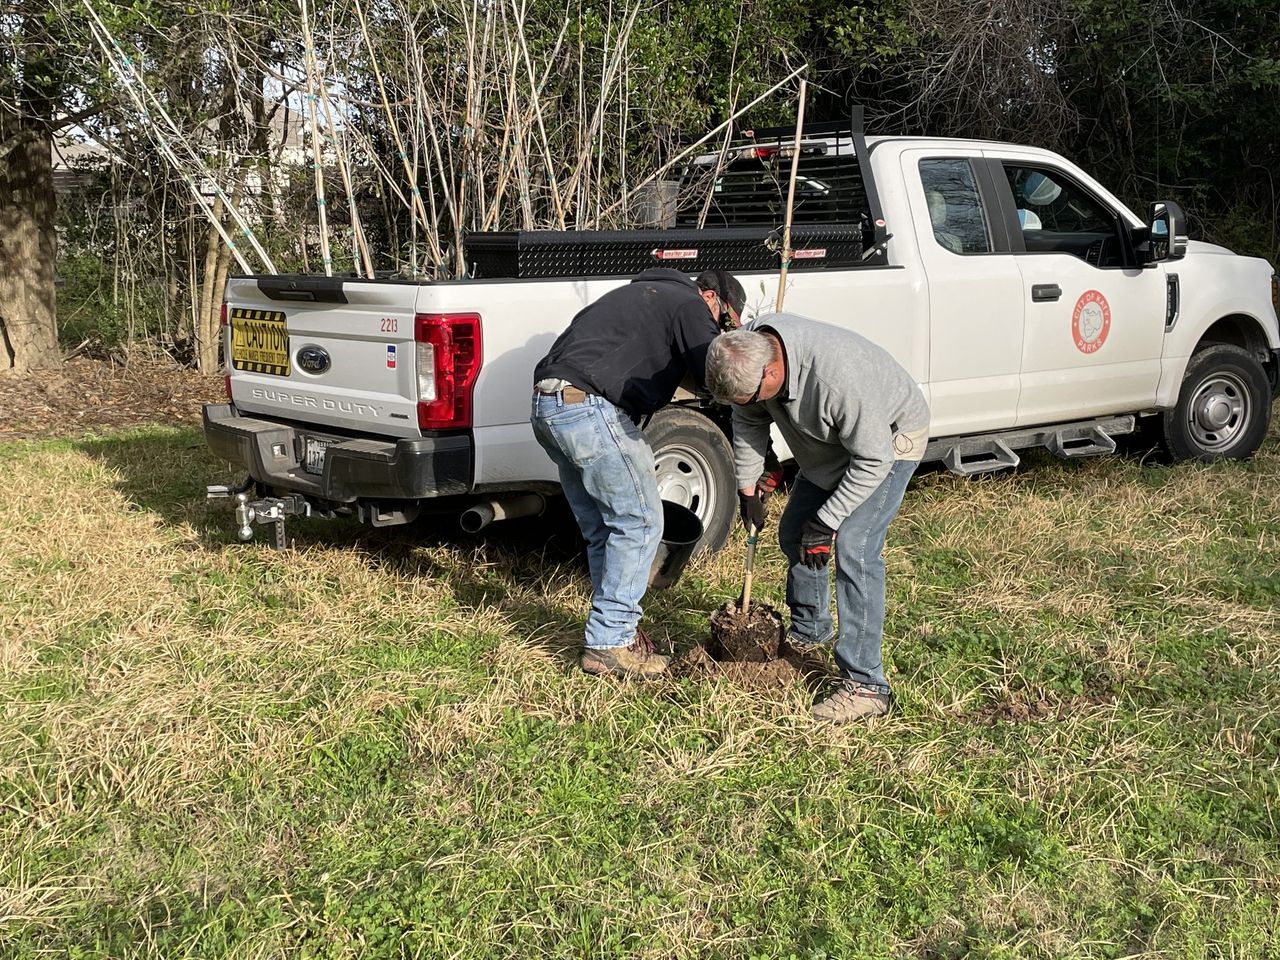 86 Oak Tree Saplings Planted by City of Katy Parks and Recreation Department